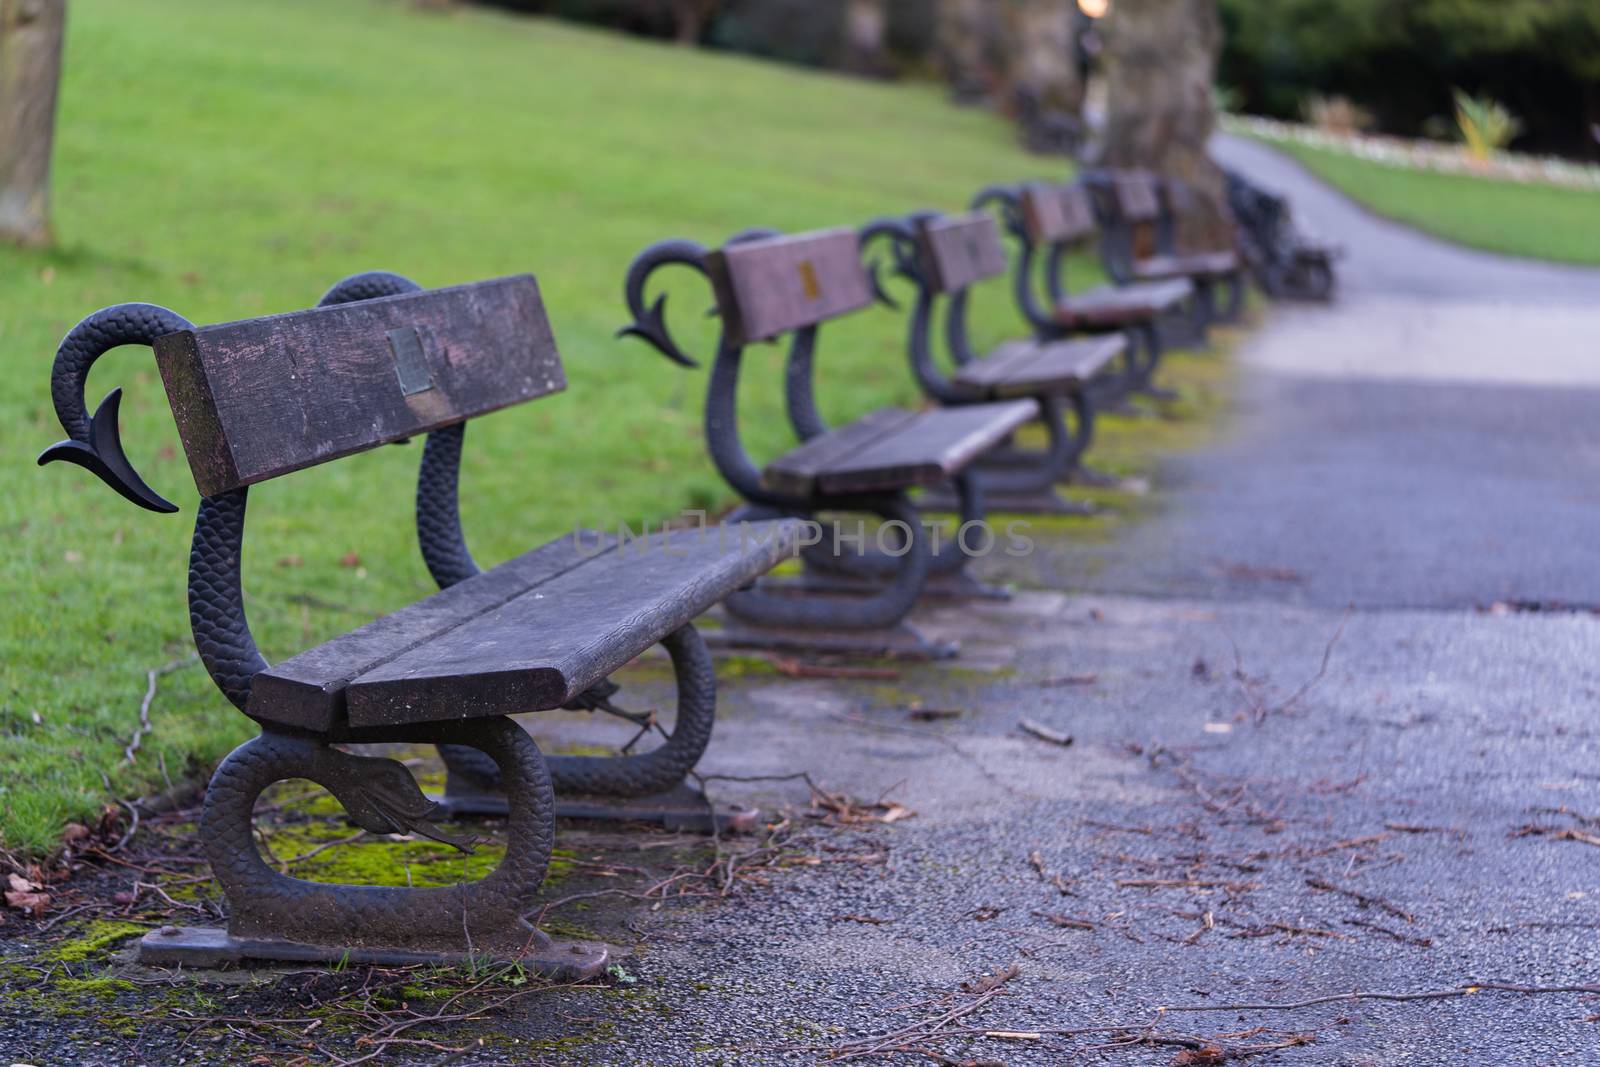 Traditional wooden park benches in a local park in England